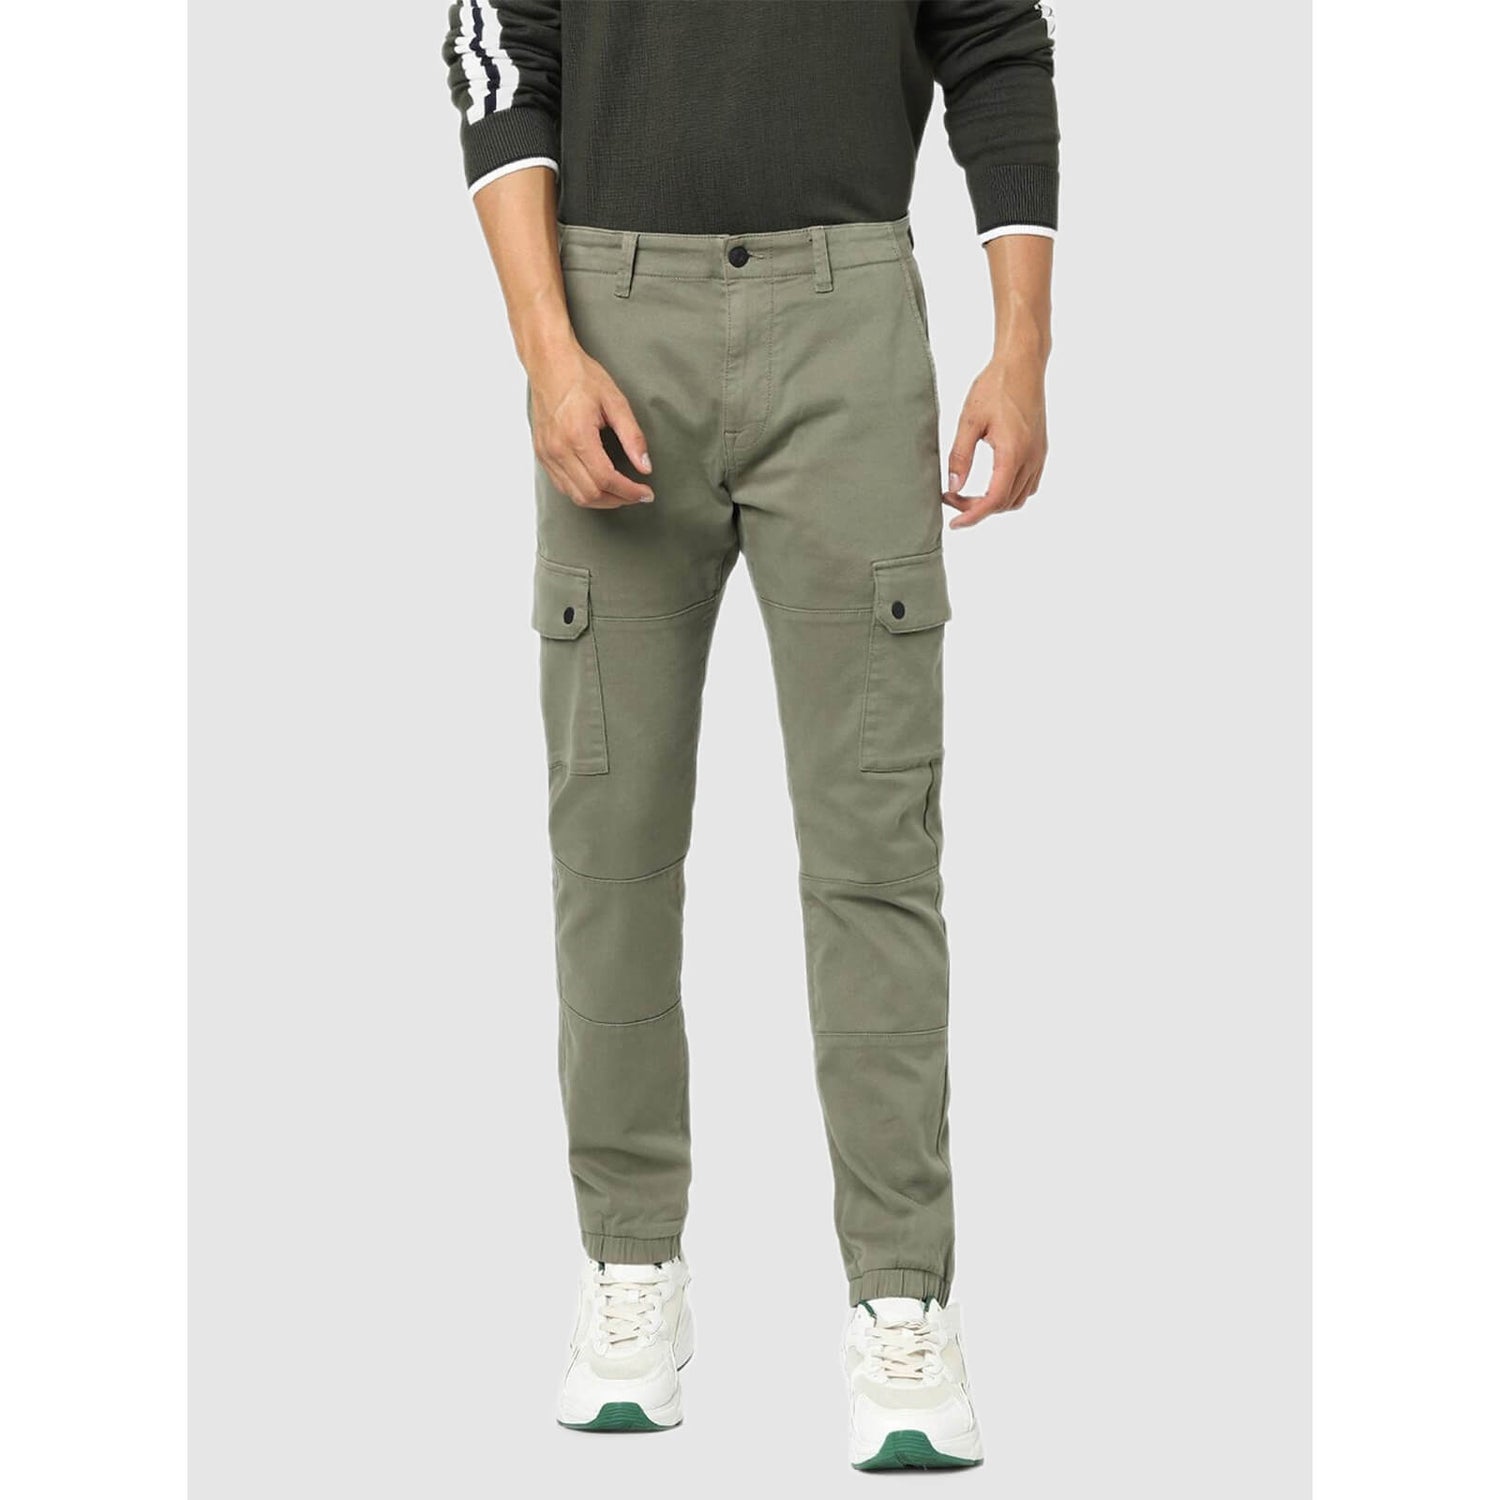 Olive Green Cotton Trousers - Buy Olive Green Cotton Trousers online in  India